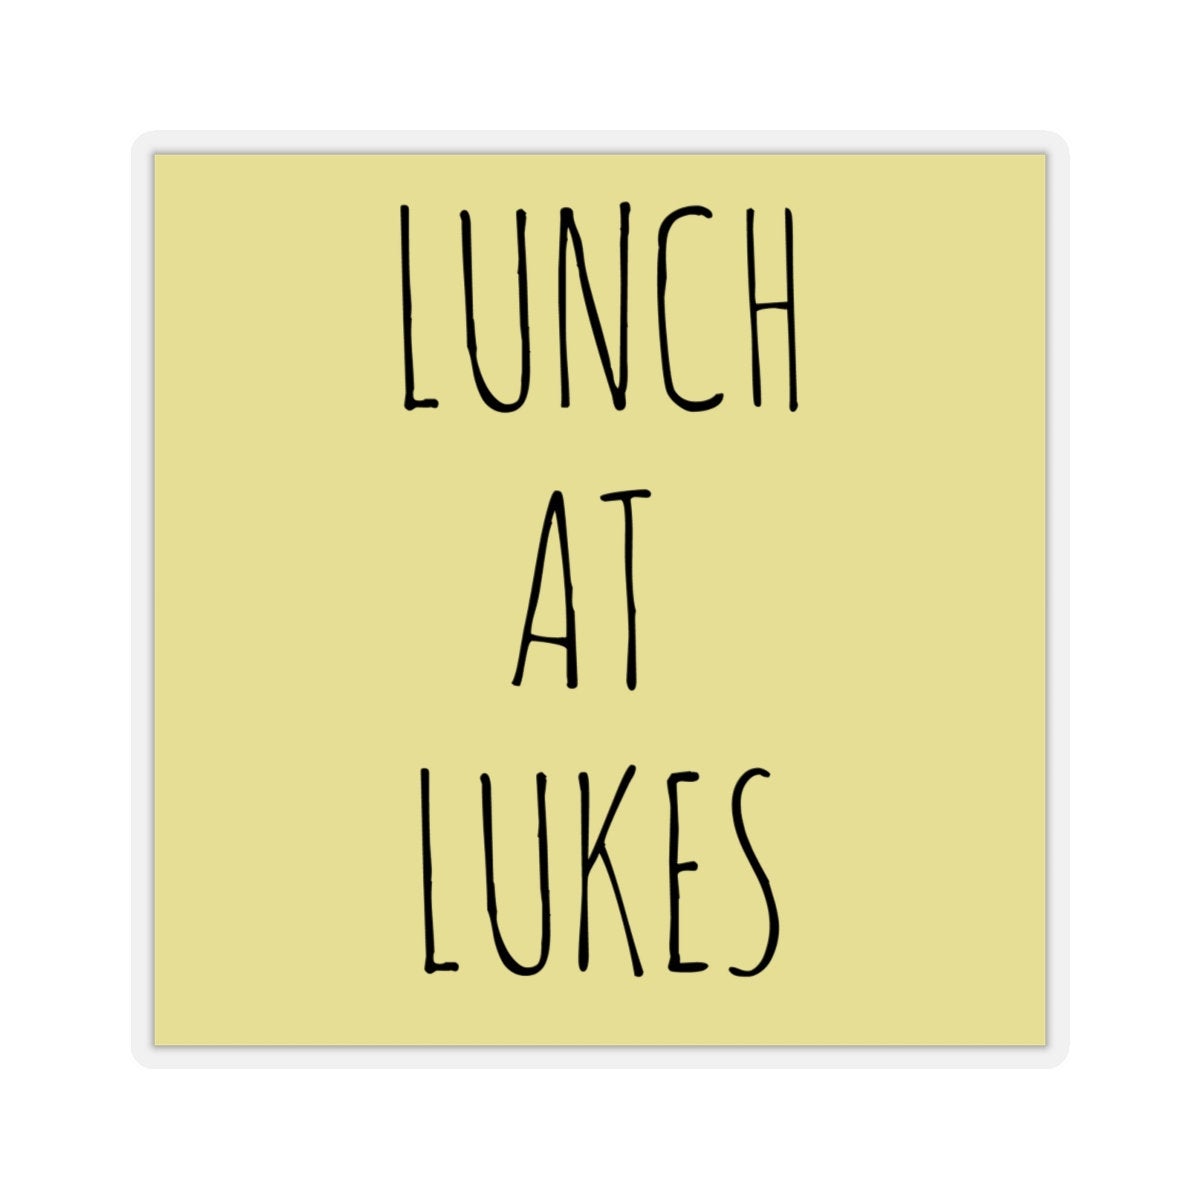 Lunch at Lukes Sticker